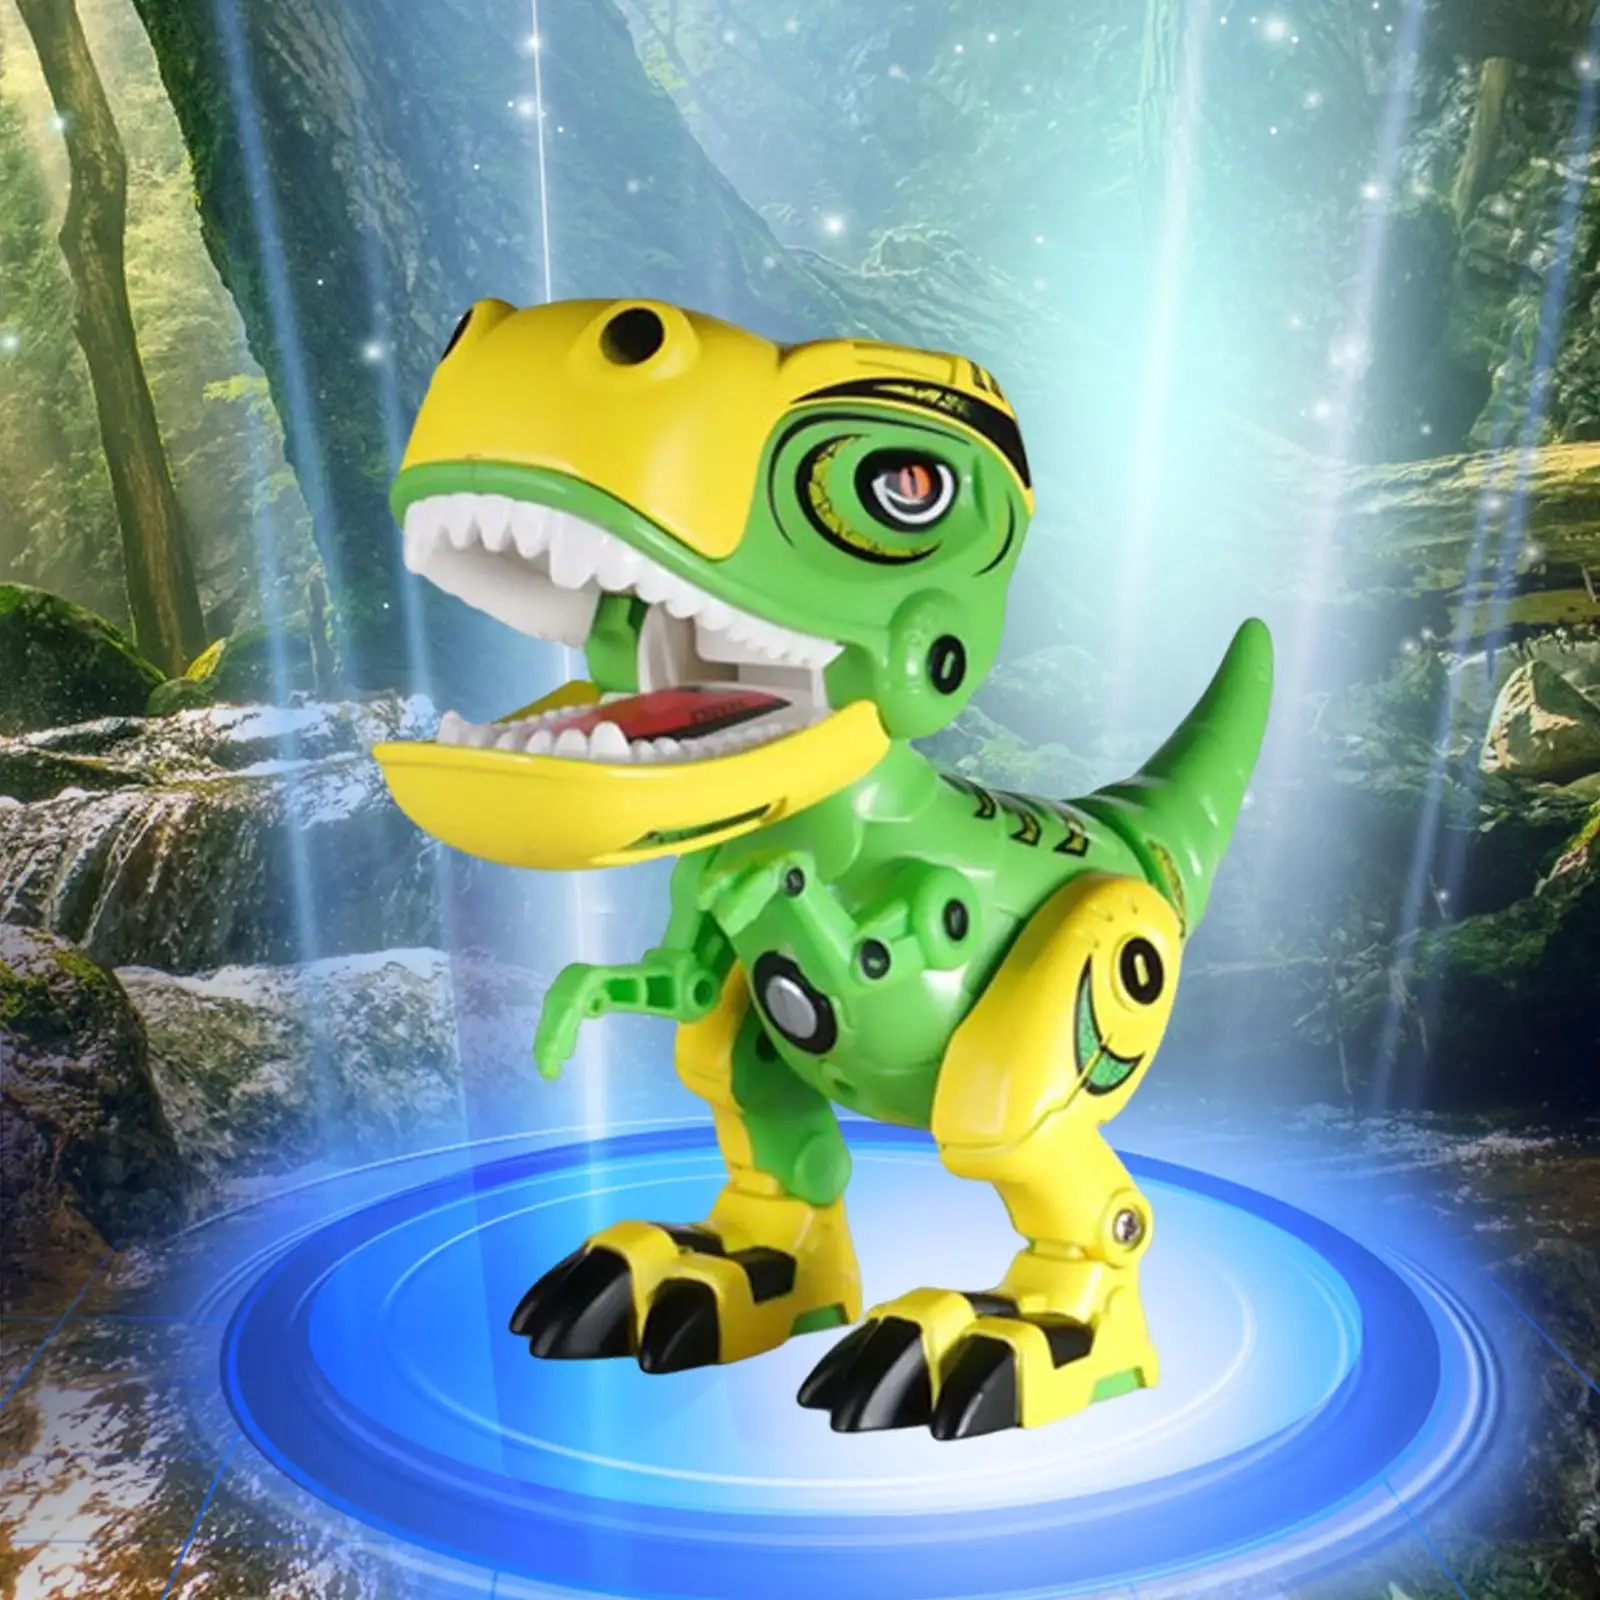 Realistic Electric Dinosaur Toy Dinosaur Action Toy Figures with Sound and Light Early Education Toy for Children Girls Gifts